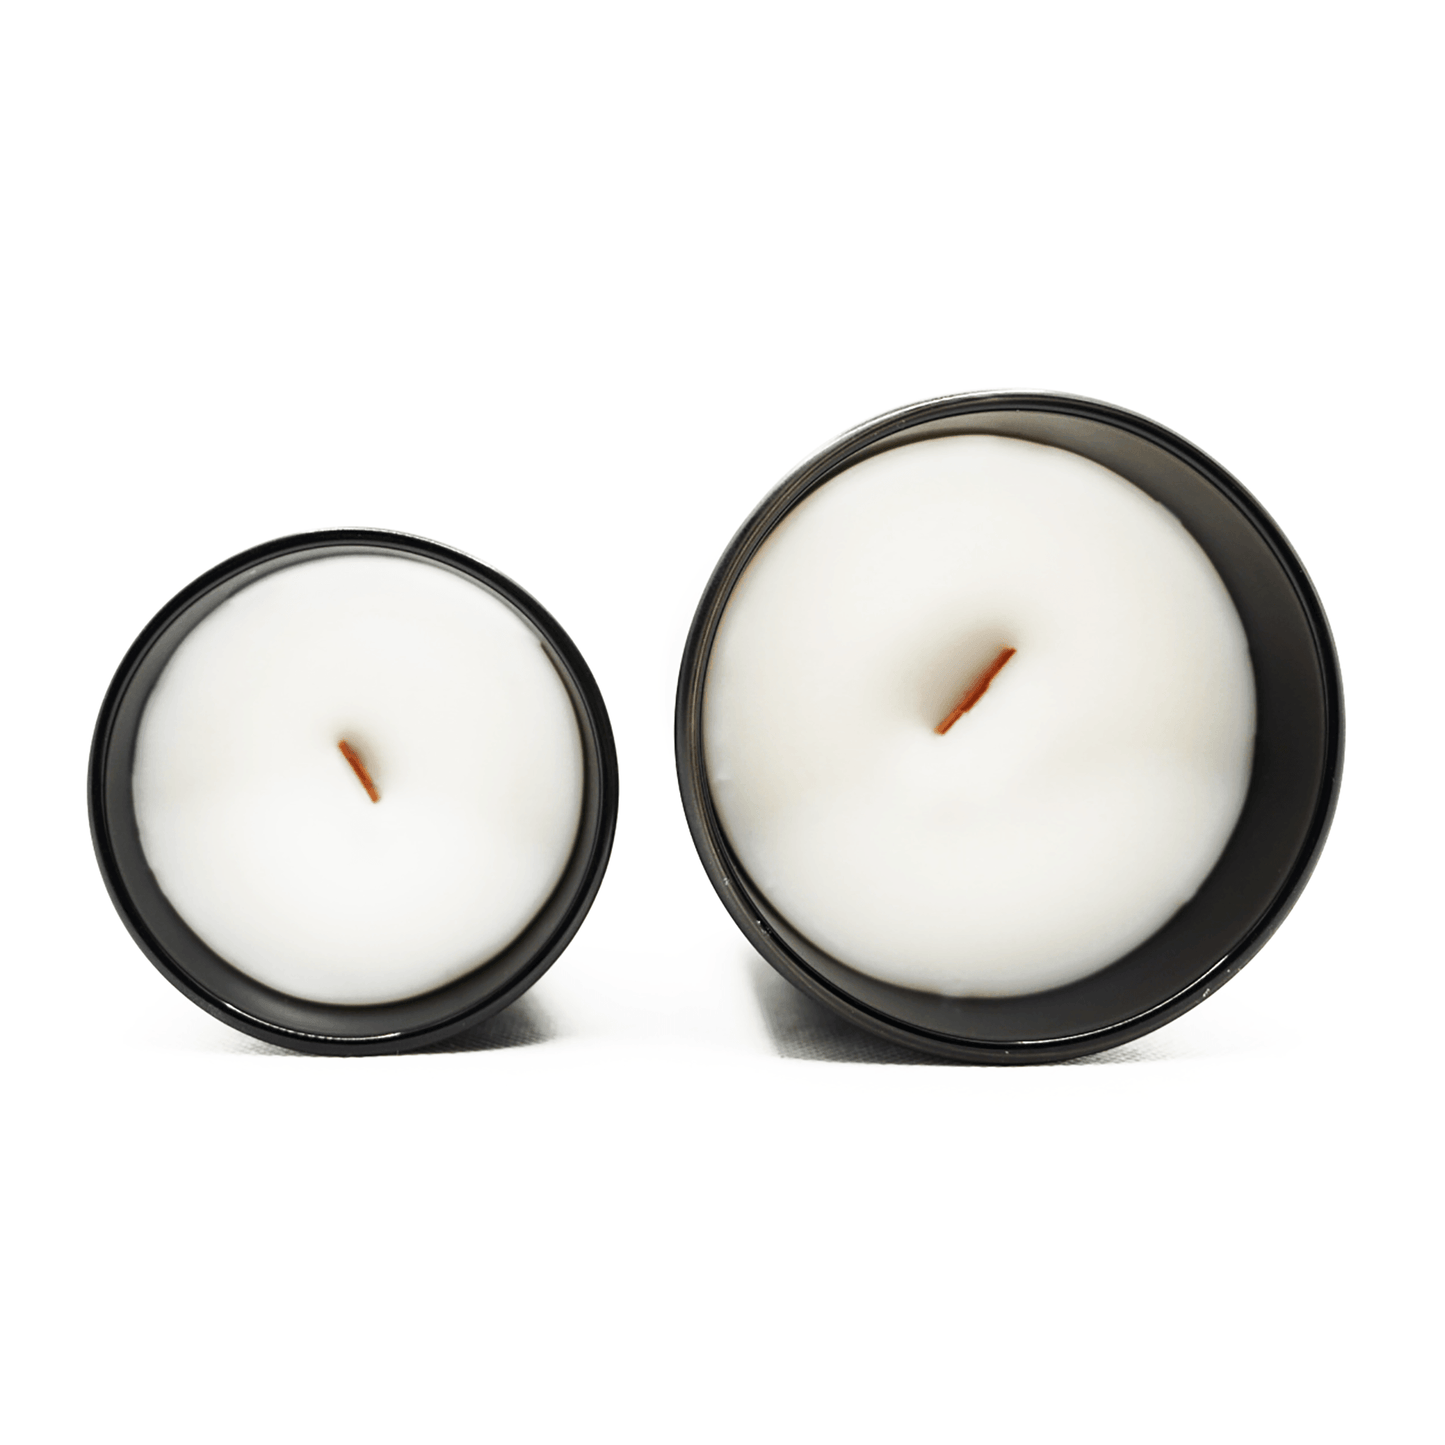 Toxic AF - Woodwick Candle - BADWAX